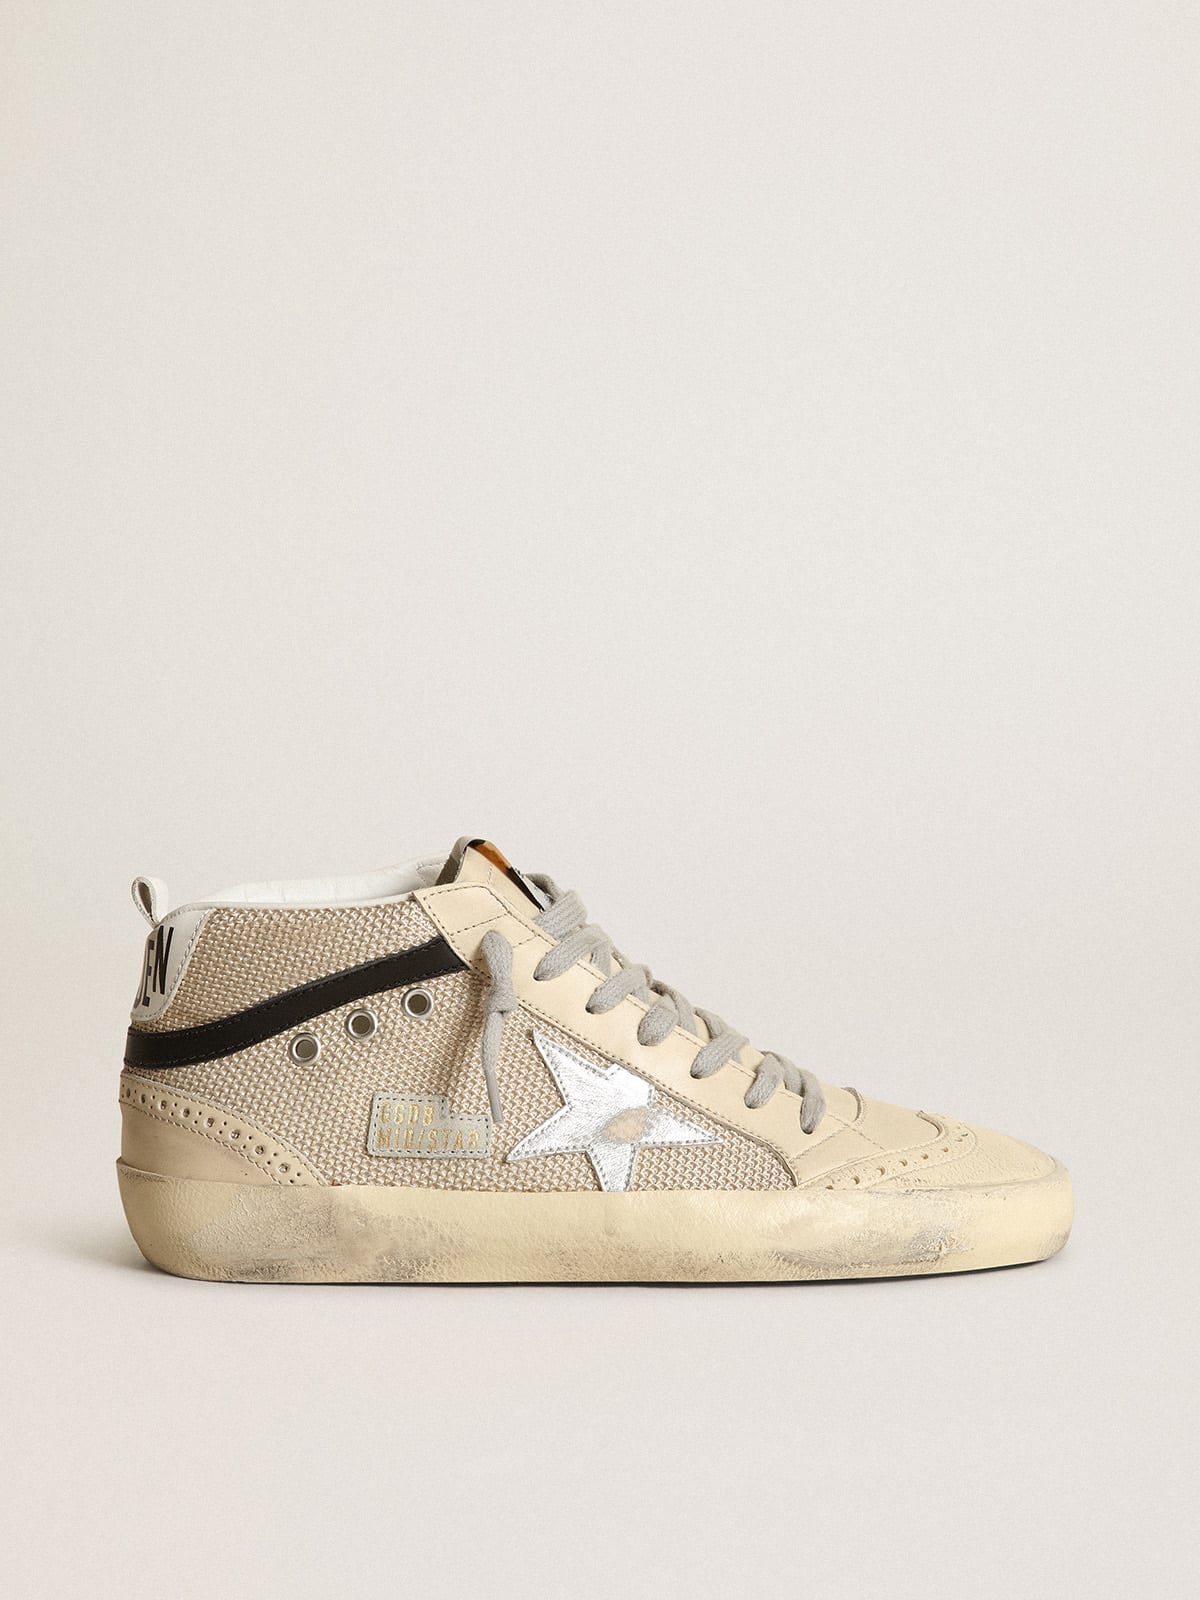 Mid Star LTD sneakers in cream-colored mesh with silver metallic 